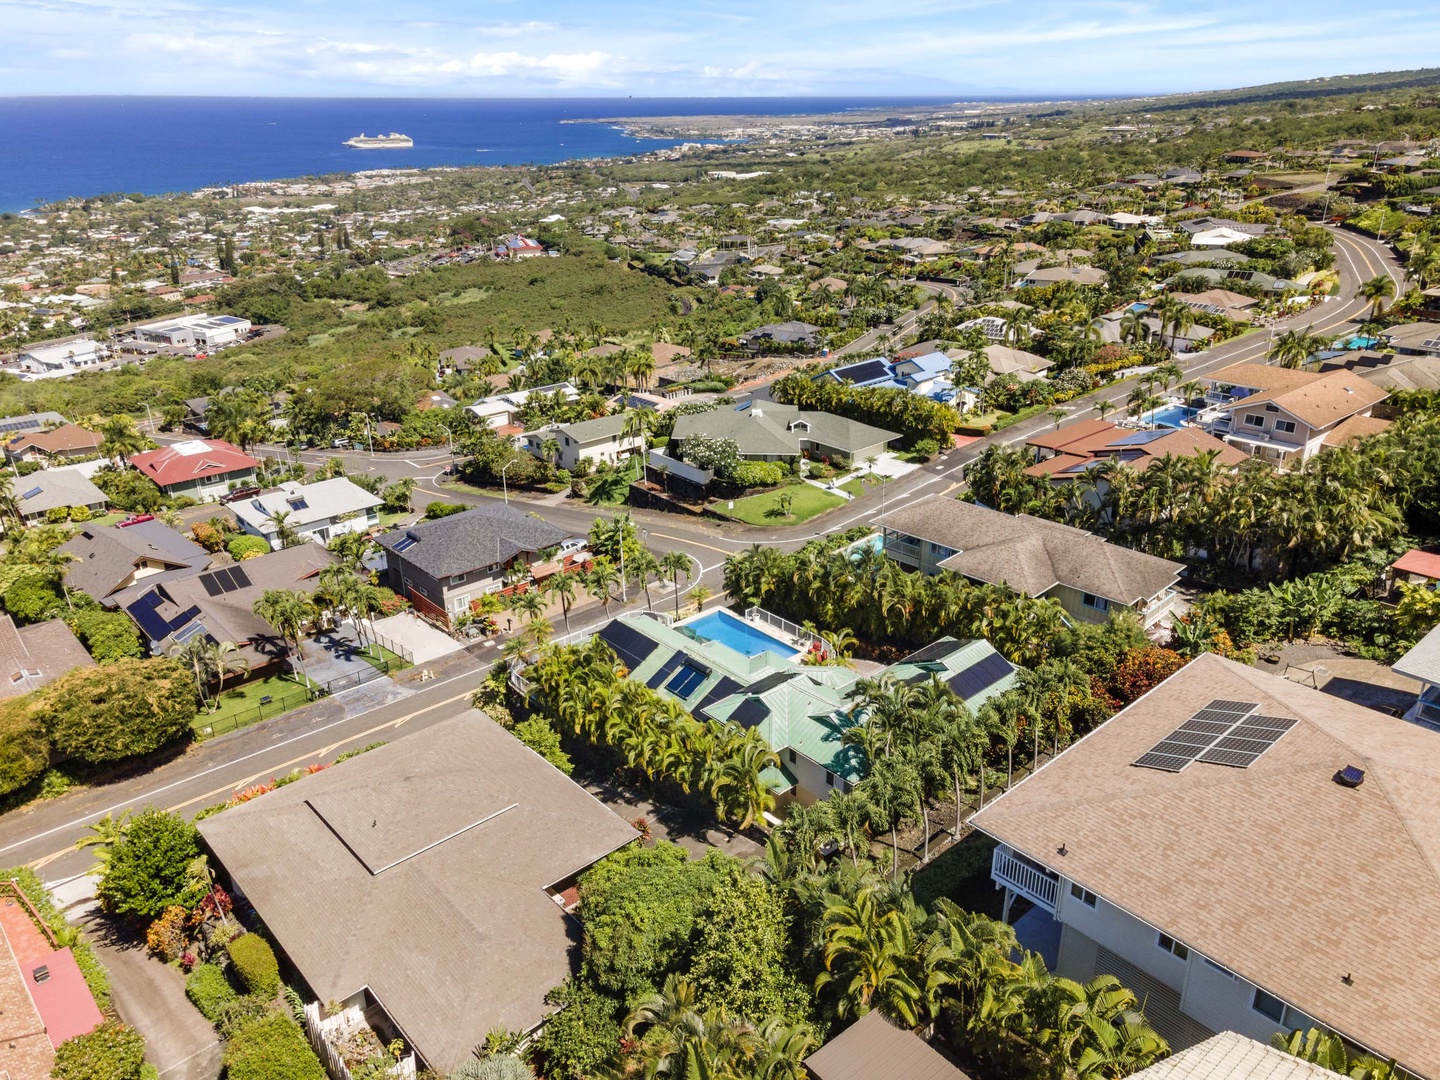 Kailua-Kona Vacation Rentals, Honu Hale - Located within a quiet residential neighborhood